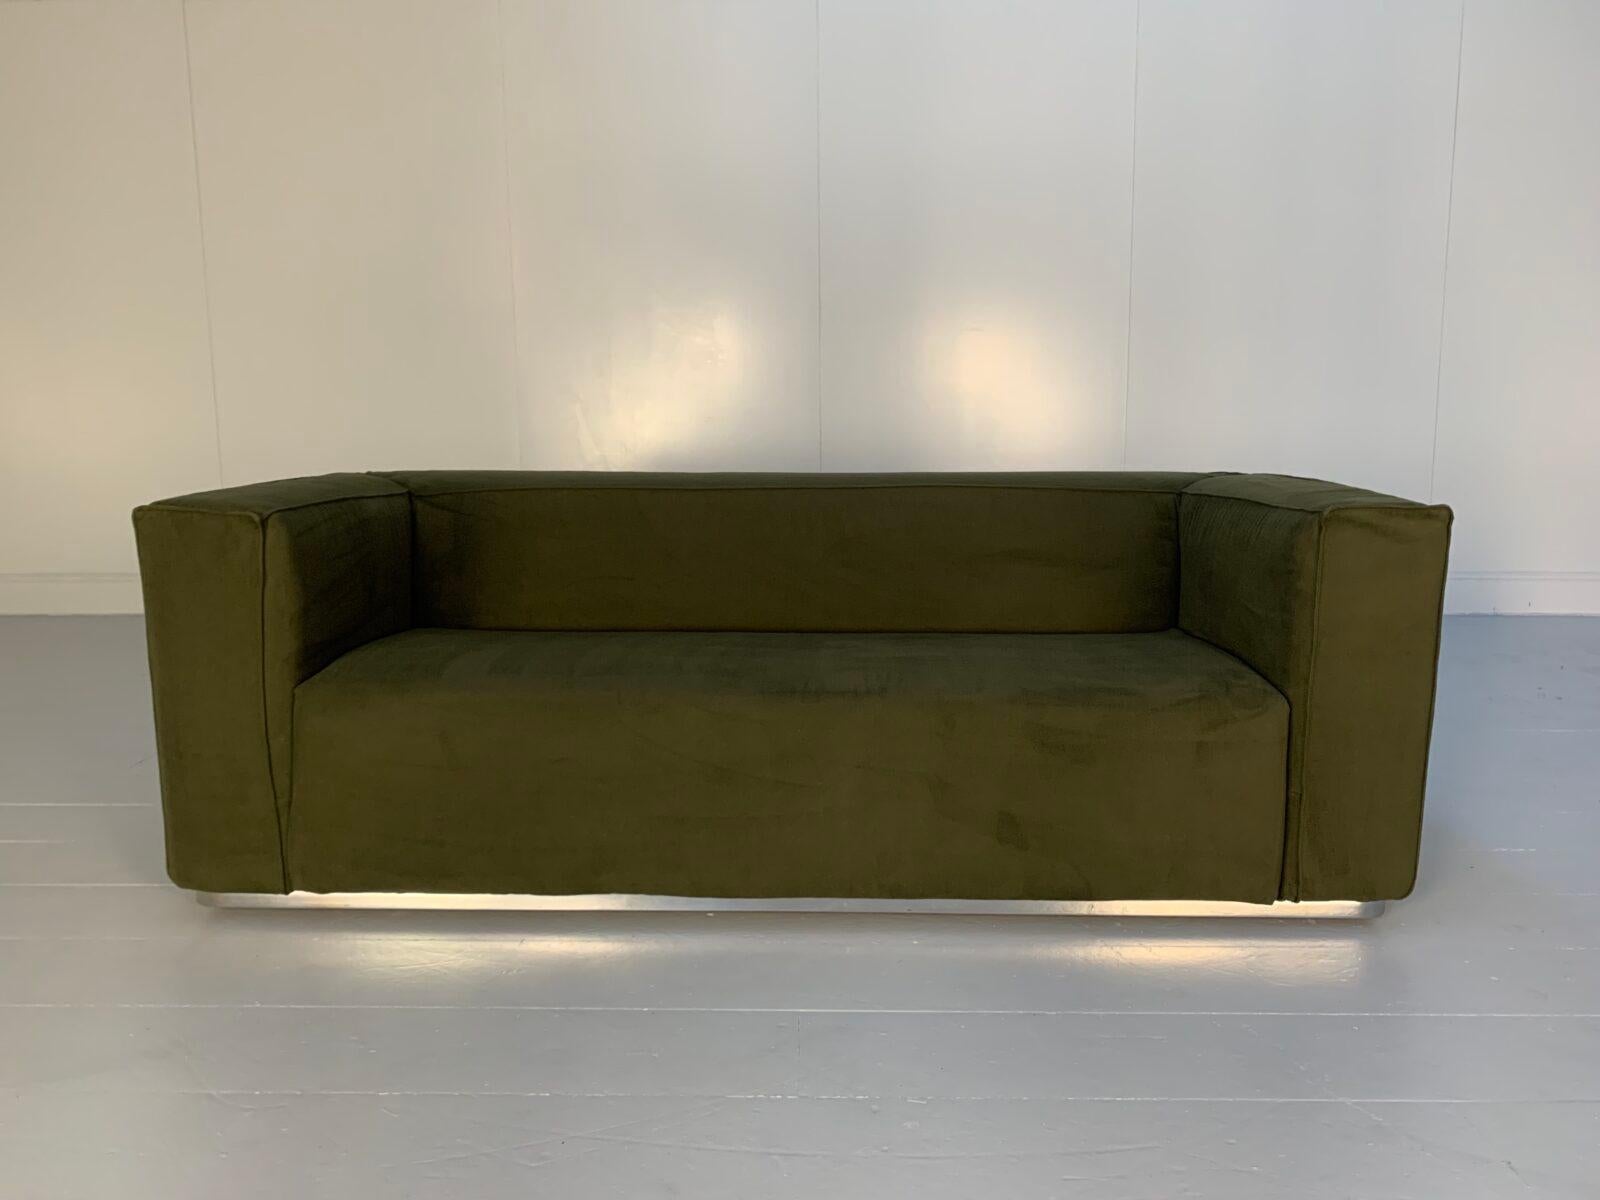 On offer on this occasion is ultra-rare (i suspect you will not find another) superb, immaculately-presented 2.5-Seat “180 Blox” Sofa, from the world renown Italian furniture house of Cassina.

As you will no doubt be aware by your interest in this